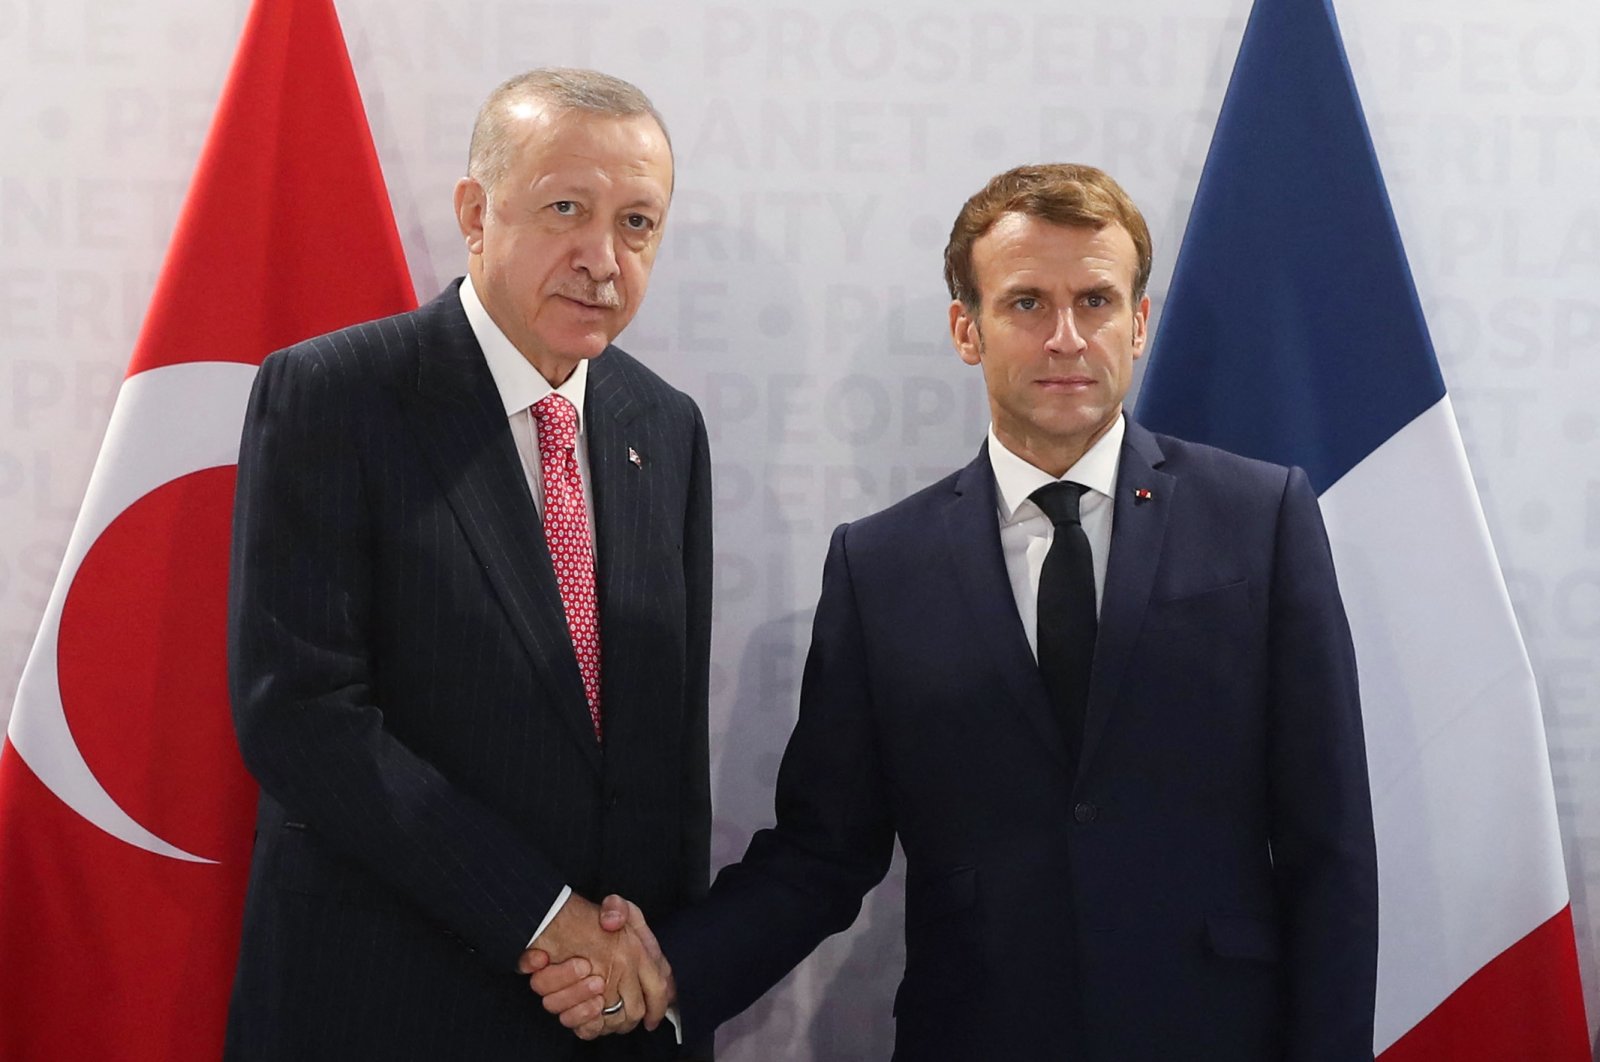 This handout photograph by the Turkish Presidential Press Service shows President Recep Tayyip Erdoğan (L) and French President Emmanuel Macron (R) shaking hands before their bilateral meeting during the G-20 Summit at the Roma Convention Center La Nuvola, in Rome, Italy, Oct. 31, 2021, (AFP Photo)